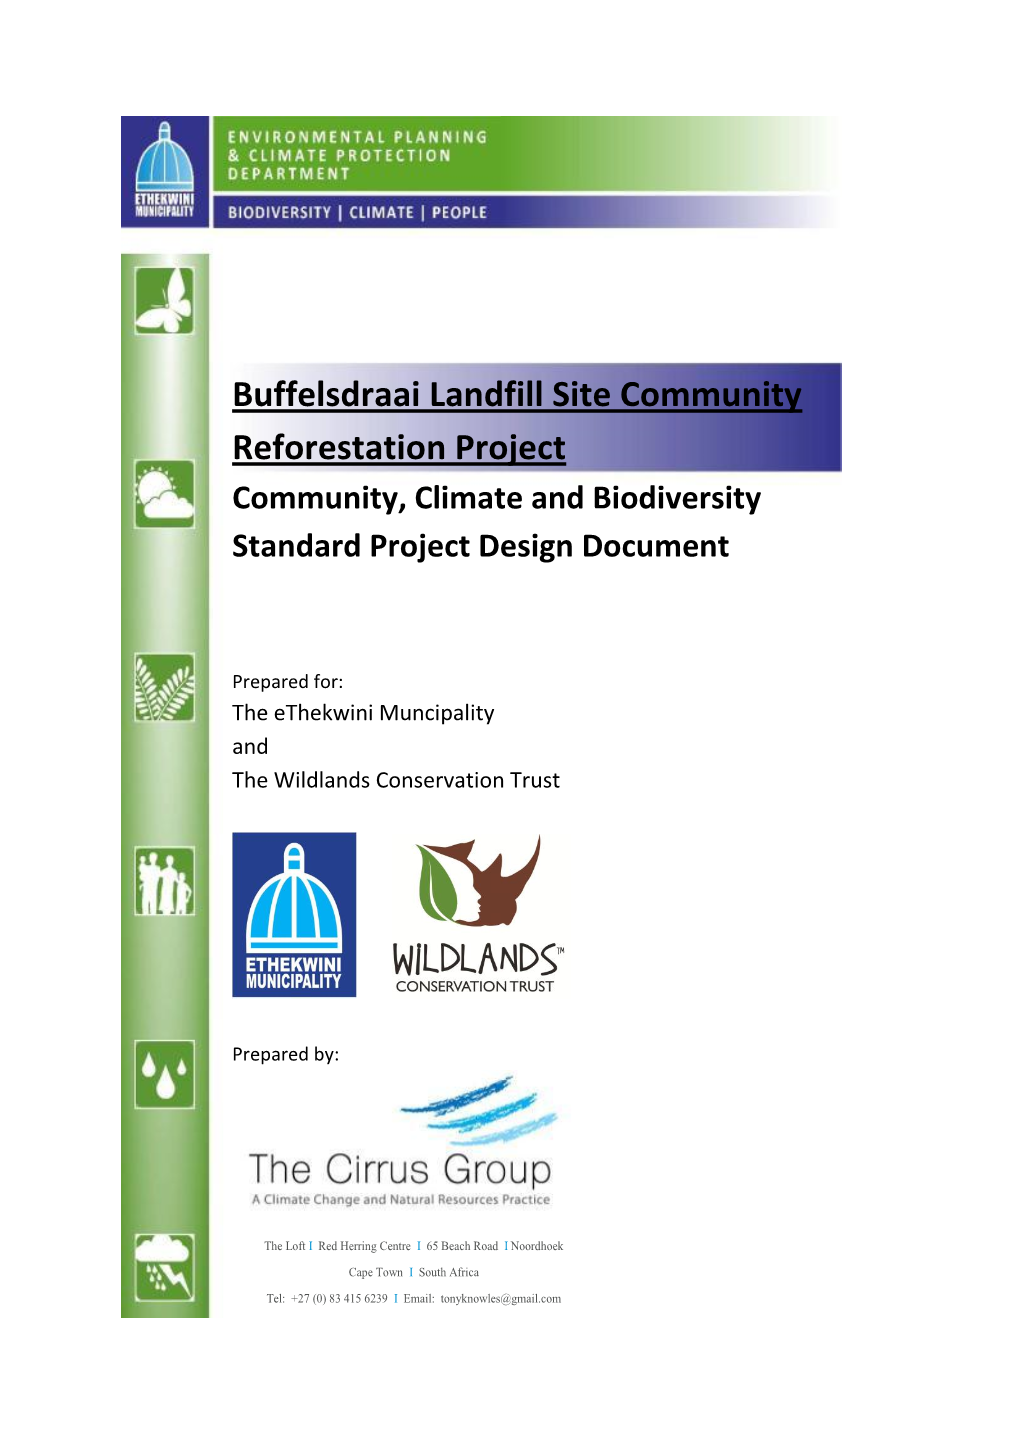 Buffelsdraai Landfill Site Community Reforestation Project Community, Climate and Biodiversity Standard Project Design Document